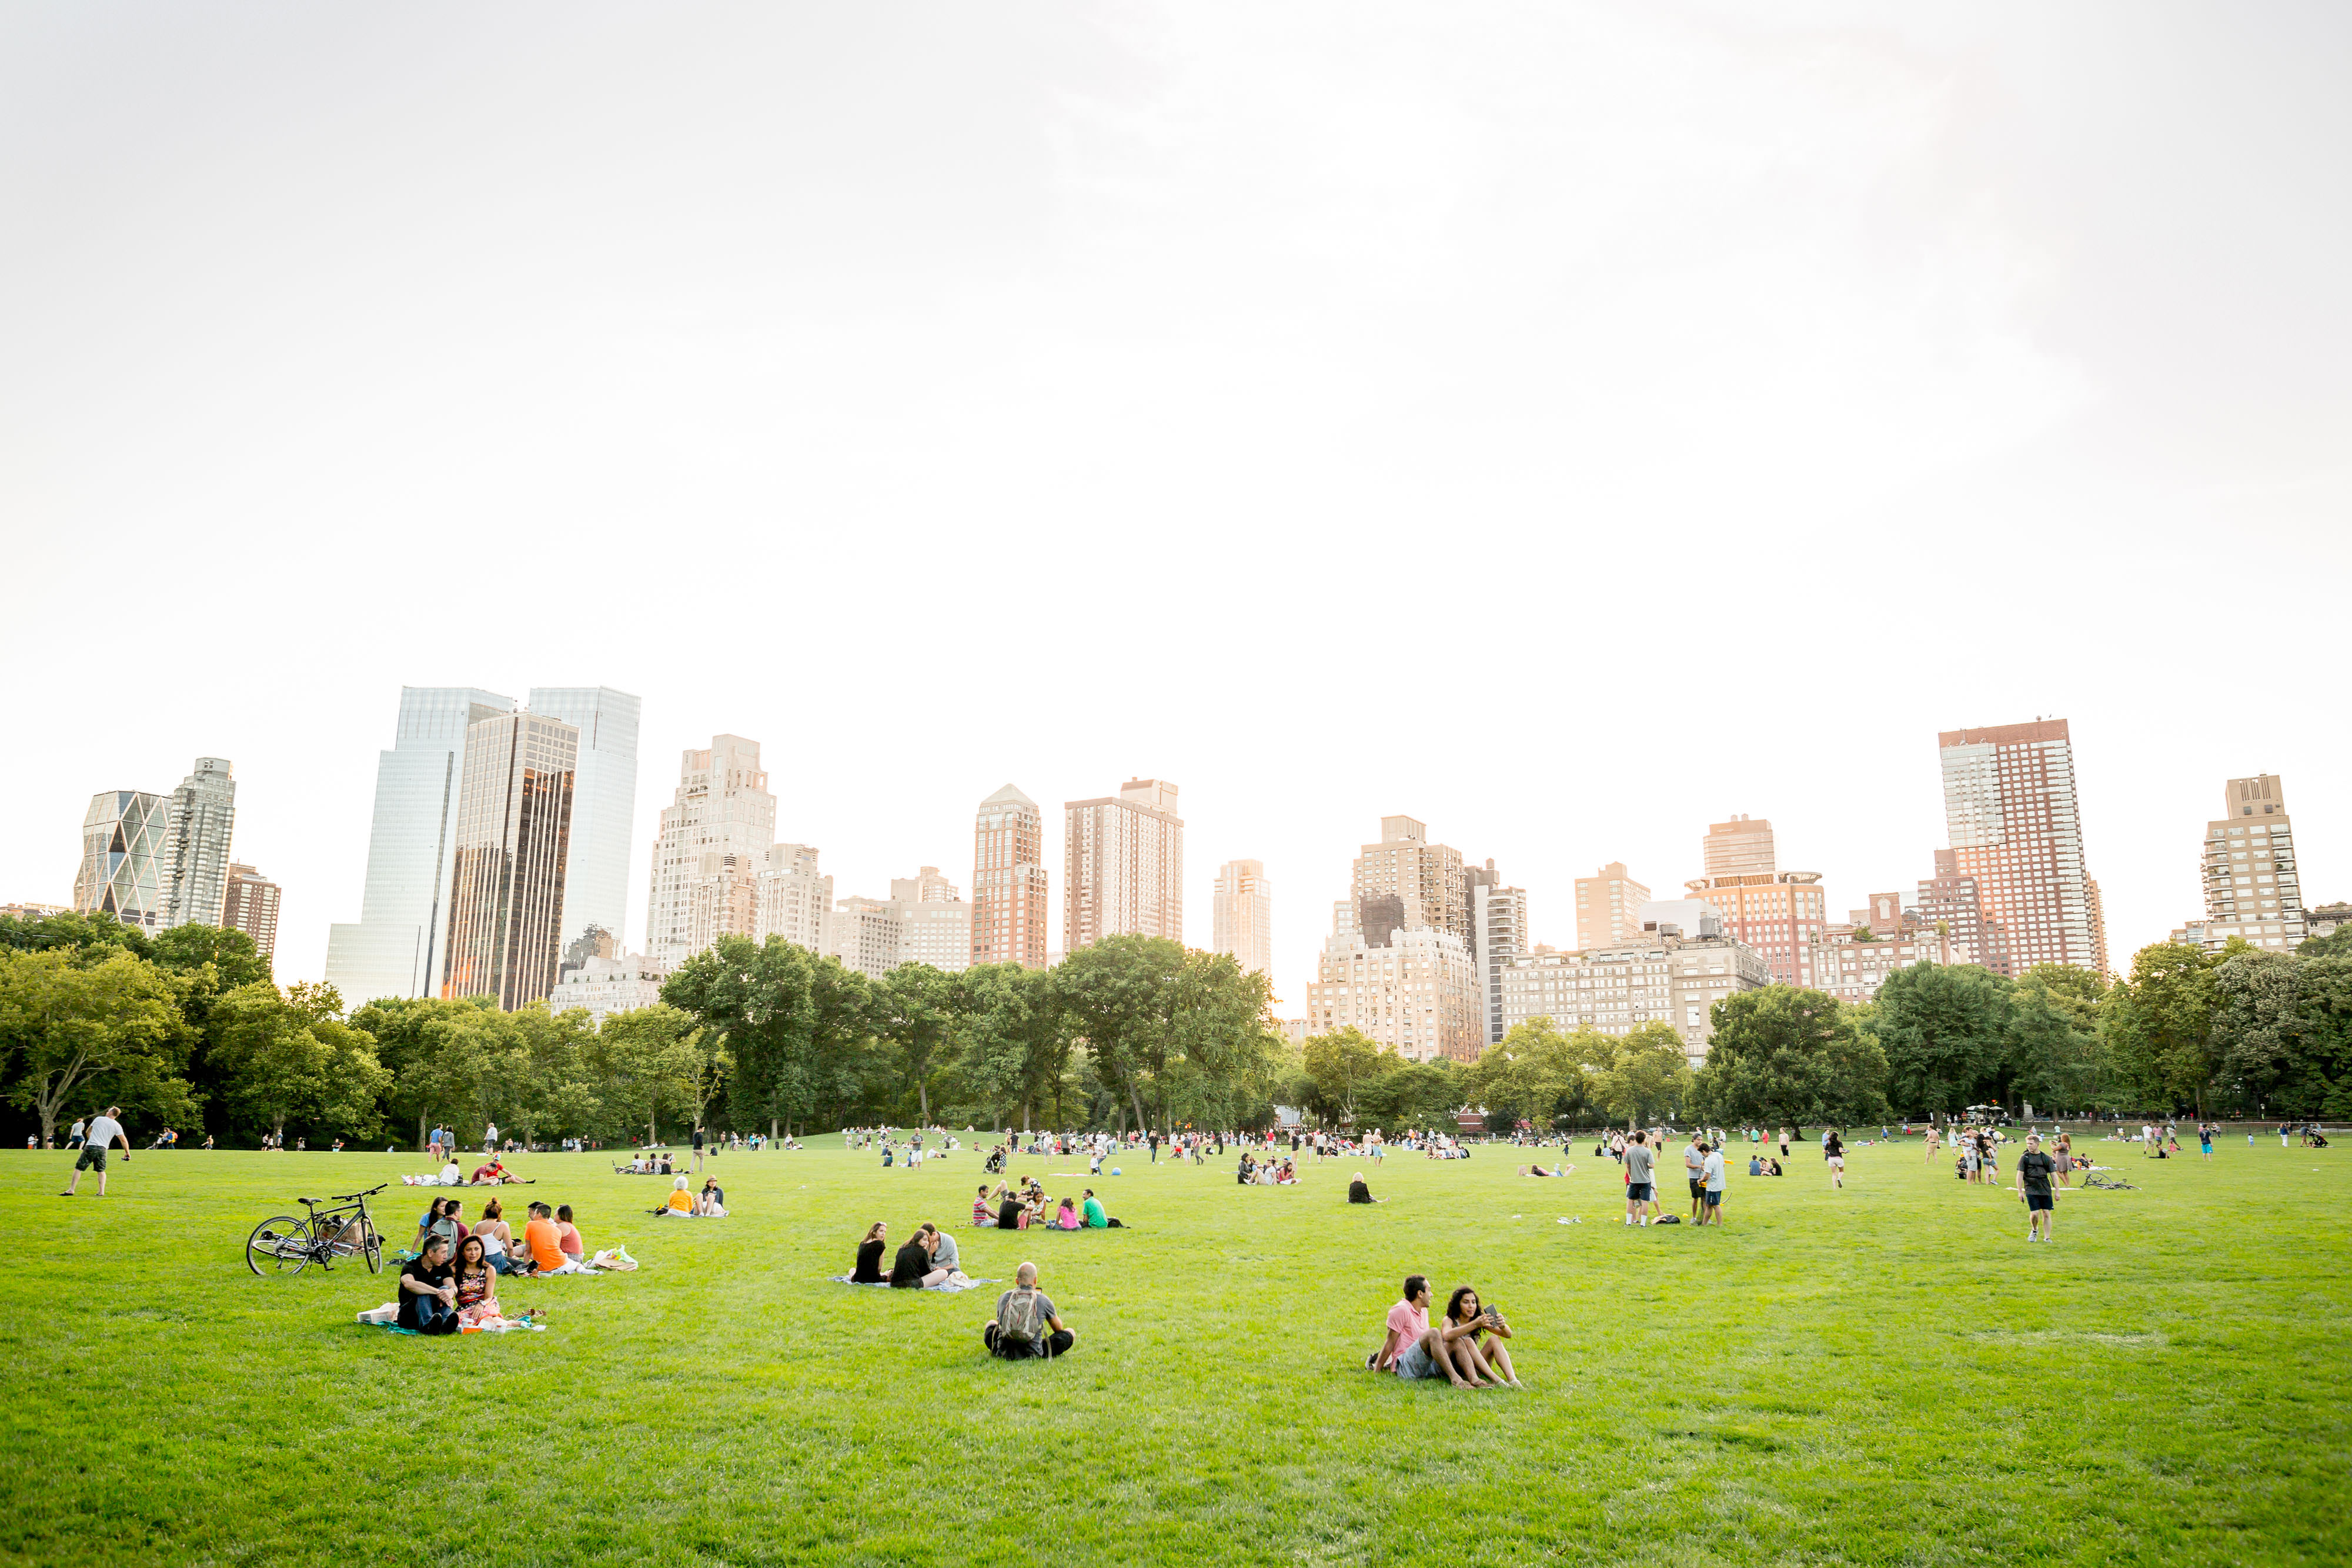 New York City skyline viewed from Central Park, where many people enjoy an open grassy field in the foreground.